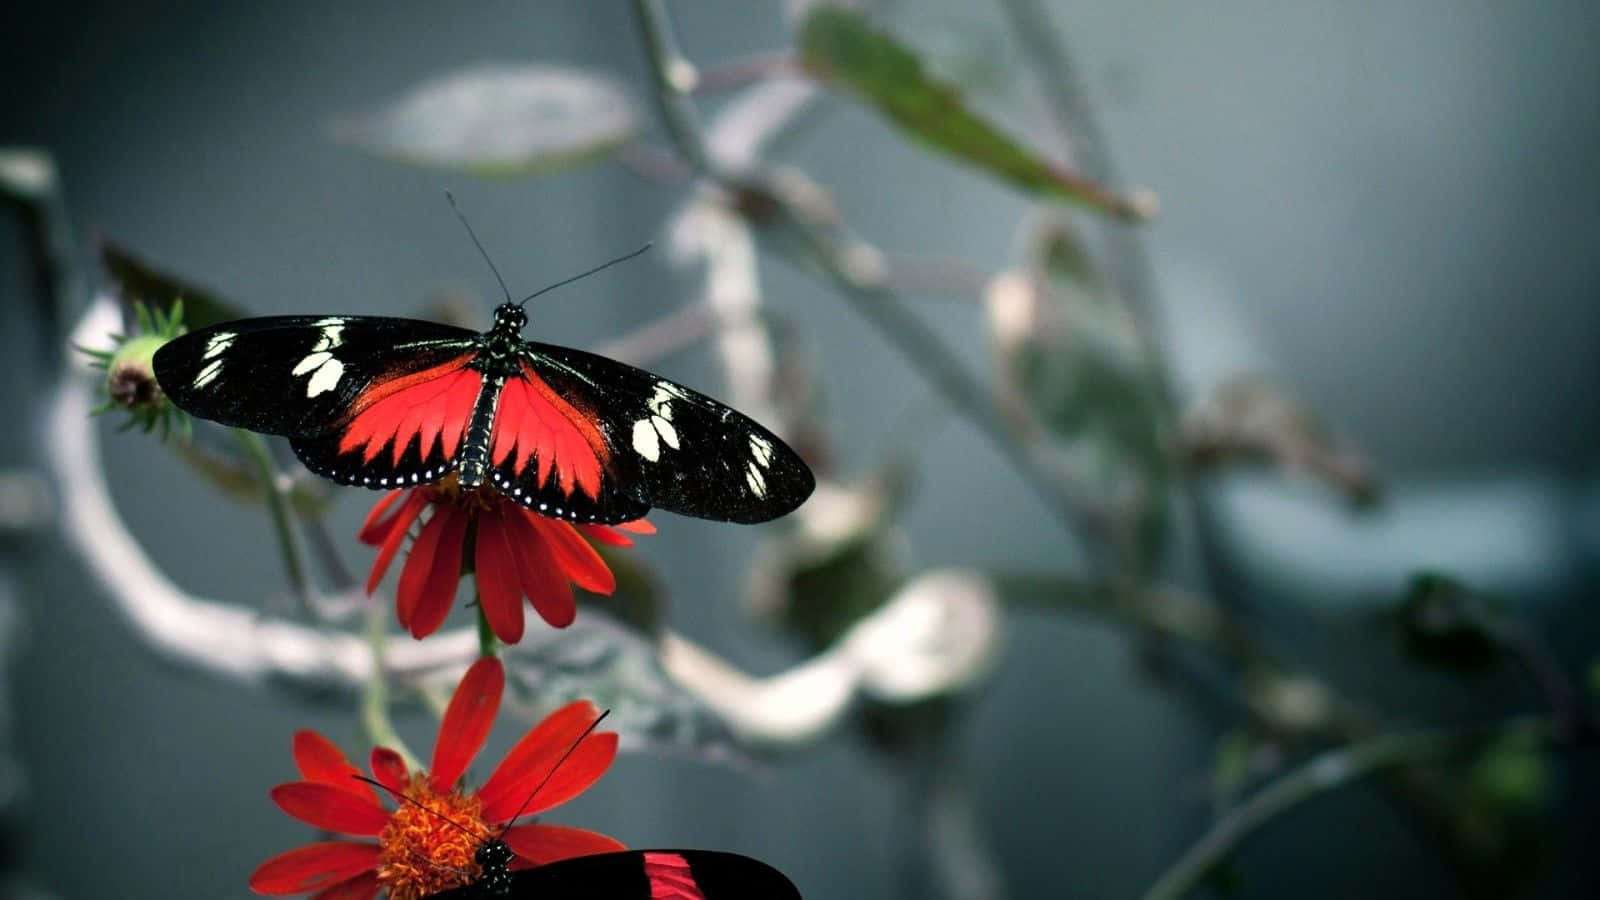 "The beauty of a butterfly"